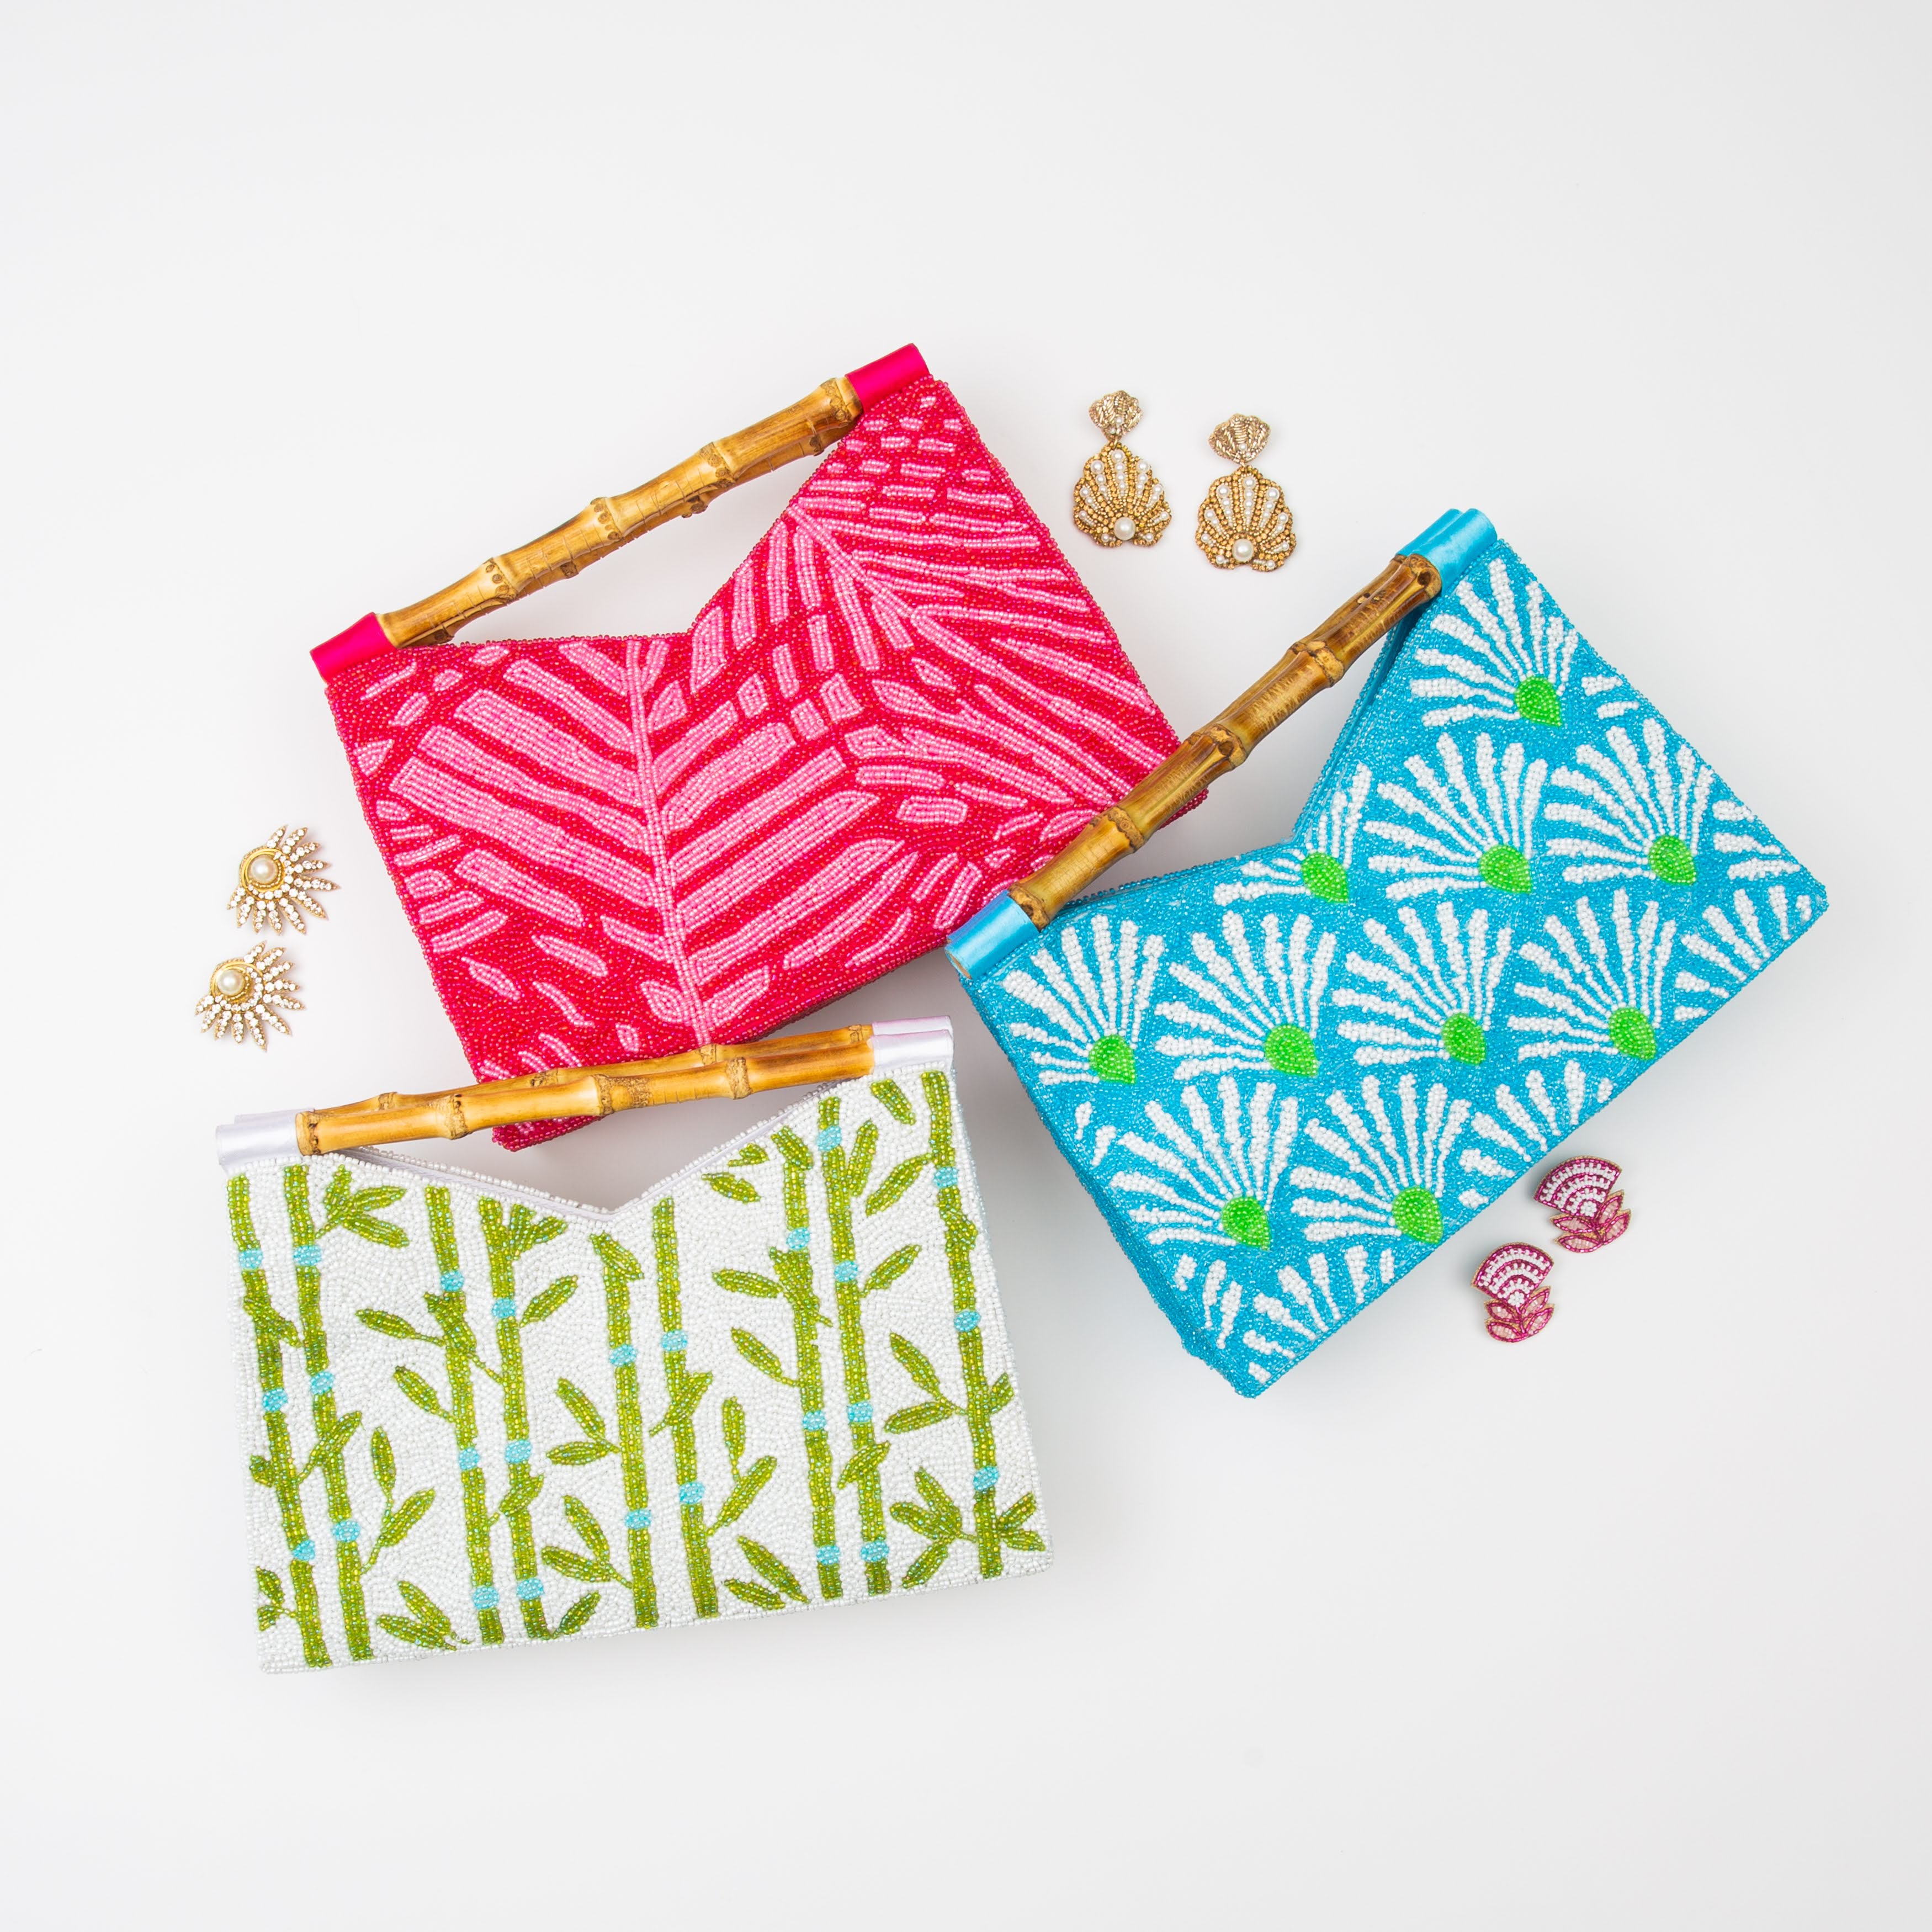 Bamboo Handle Clutch in Pink Palm